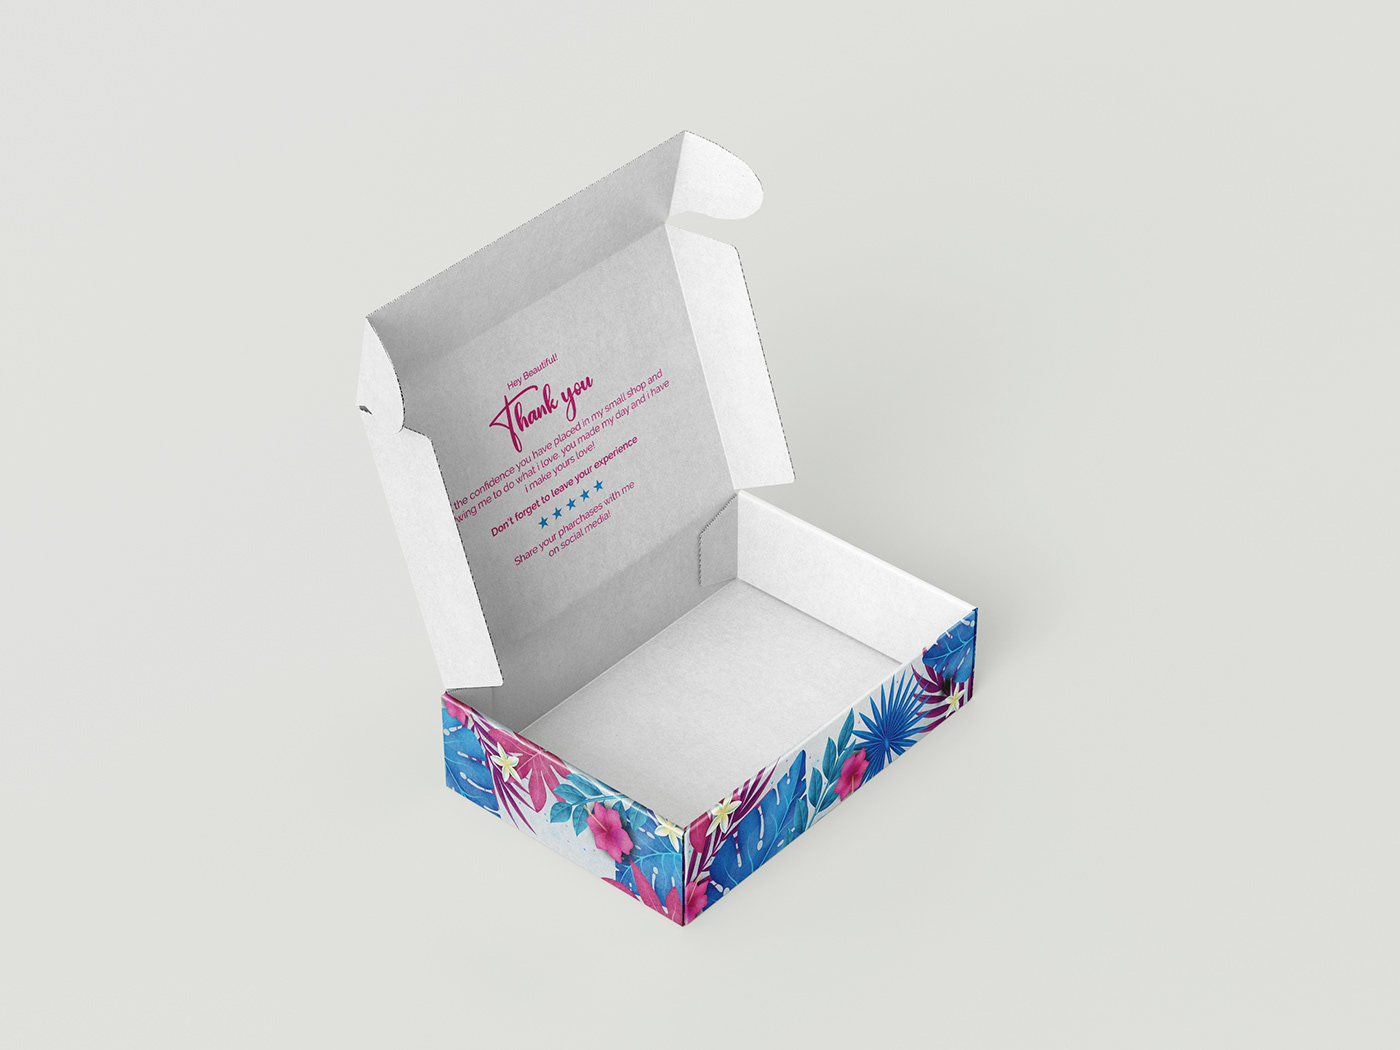 mailer box subscription box gift box box packaging Cosmetics Label Design product packaging box design rigid boxes custom packaging printed boxes